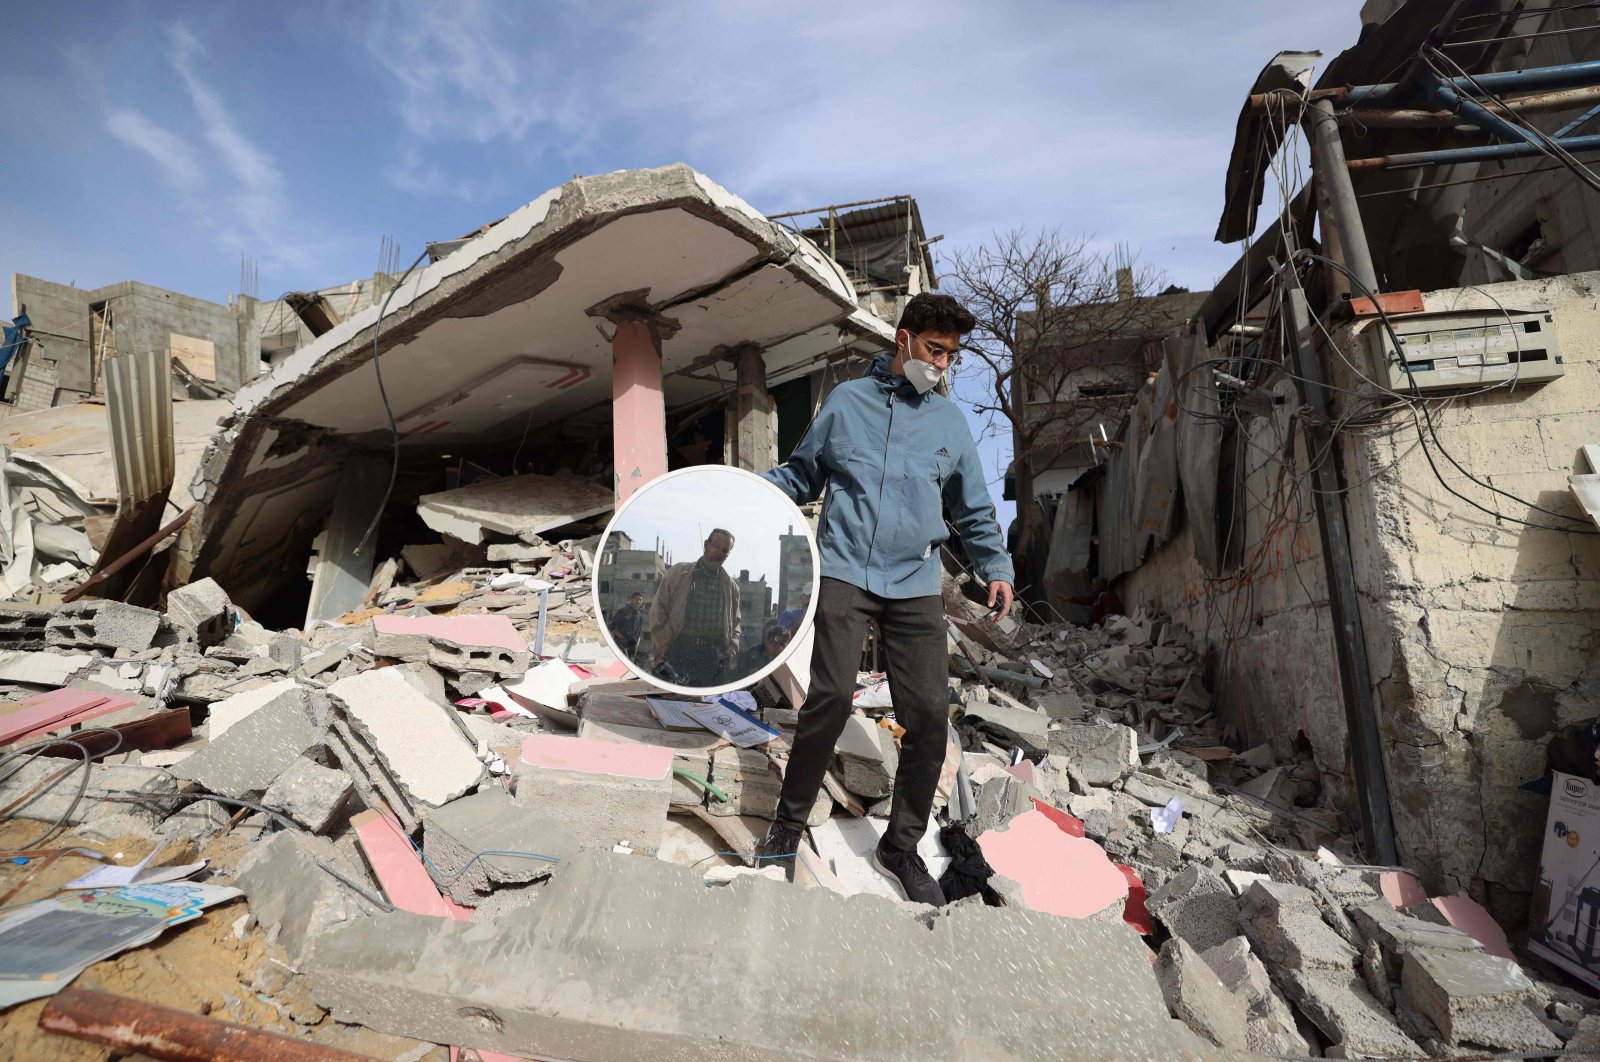 A Palestinian man carries a mirror recovered from debris following Israeli bombardment in Rafah, in the southern Gaza Strip, on March 27, 2024, amid the ongoing conflict between Israel and the Palestinian militant group Hamas. (Photo by MOHAMMED ABED / AFP)